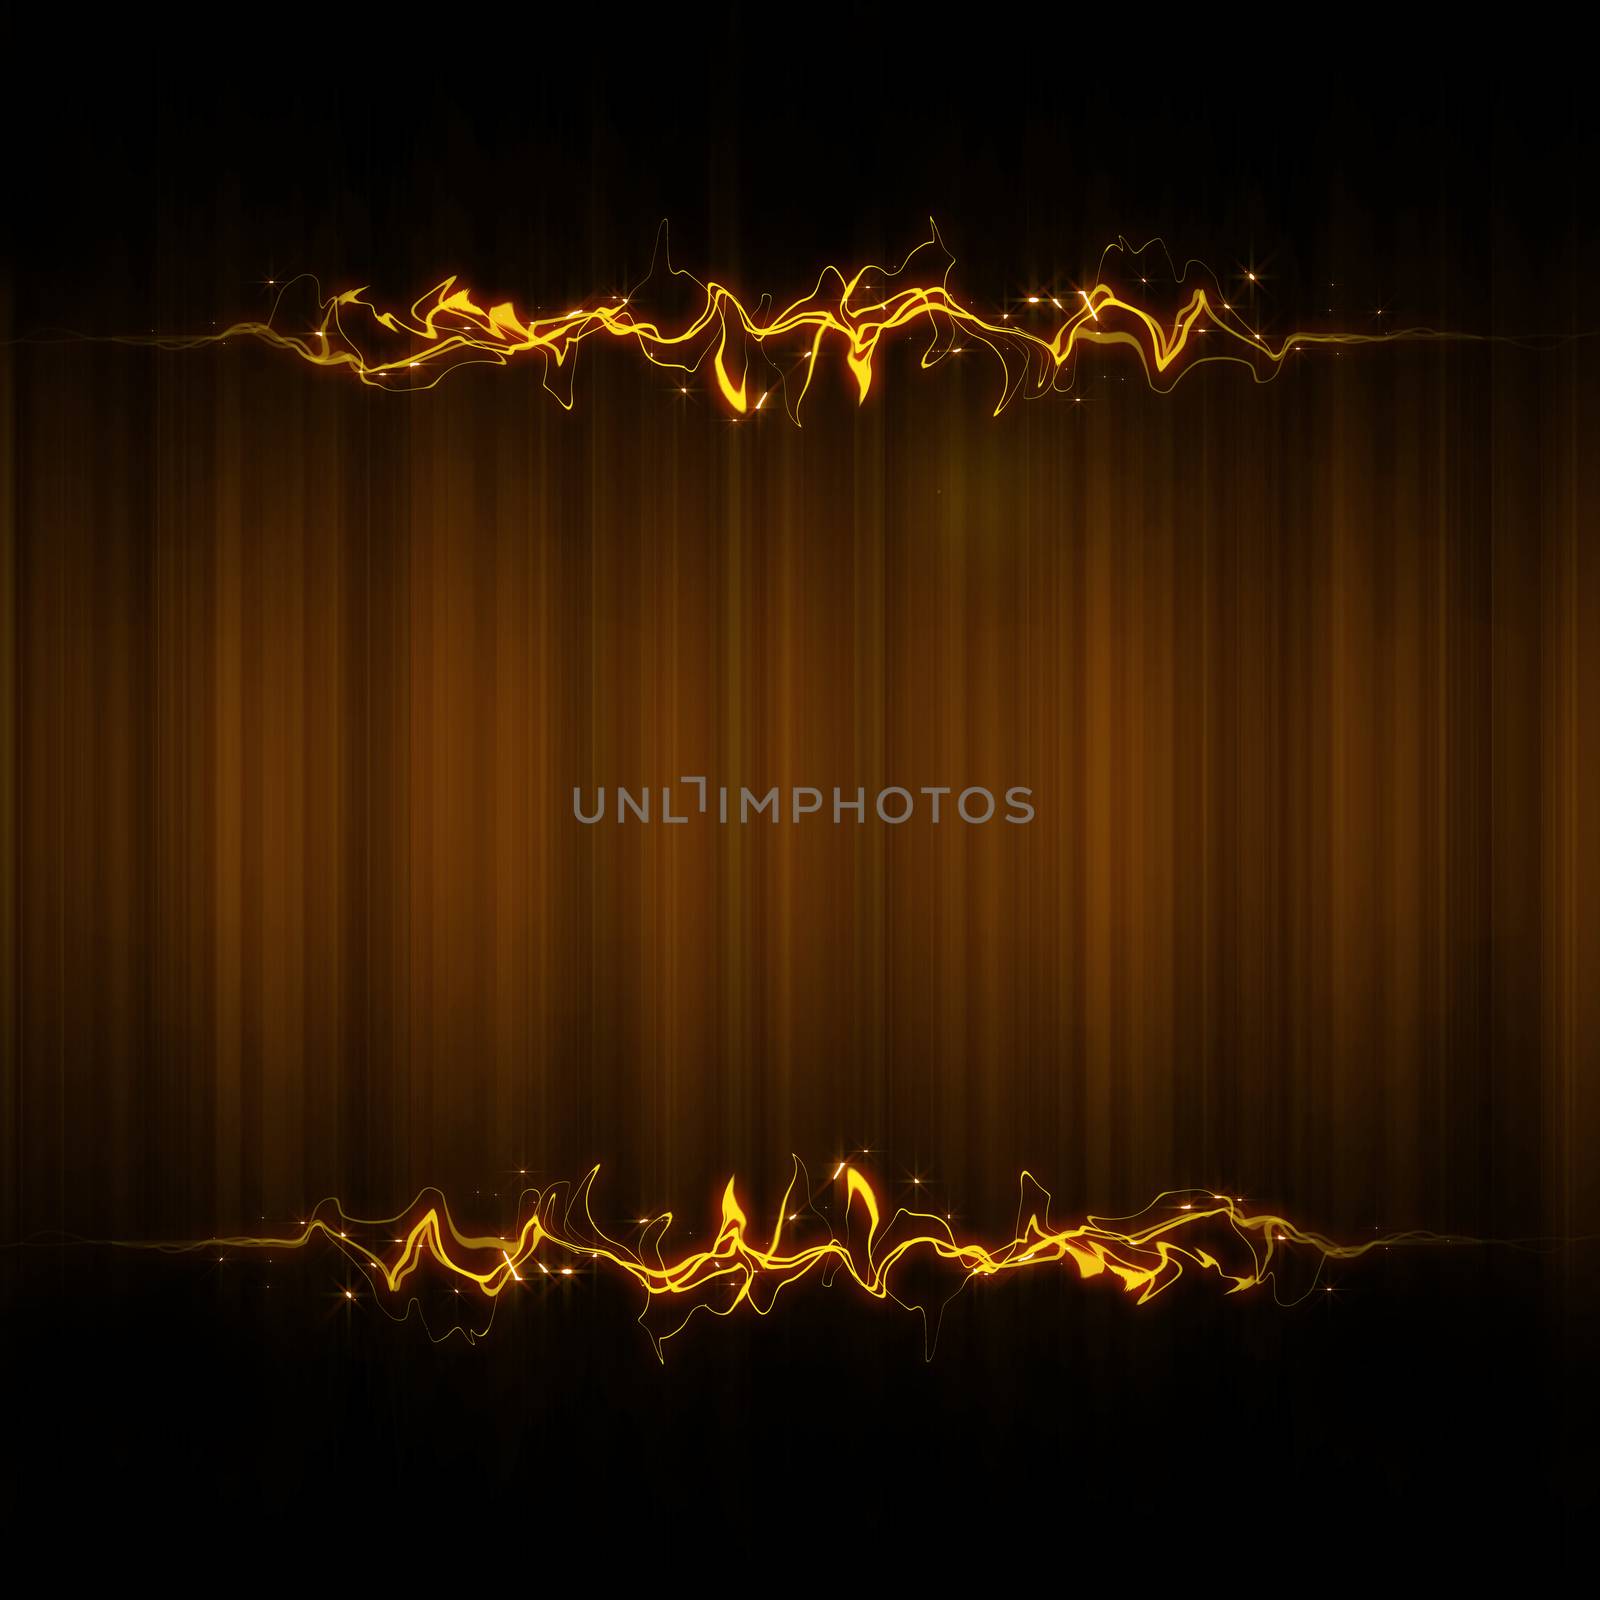 Abstract cover light background for text by kaisorn